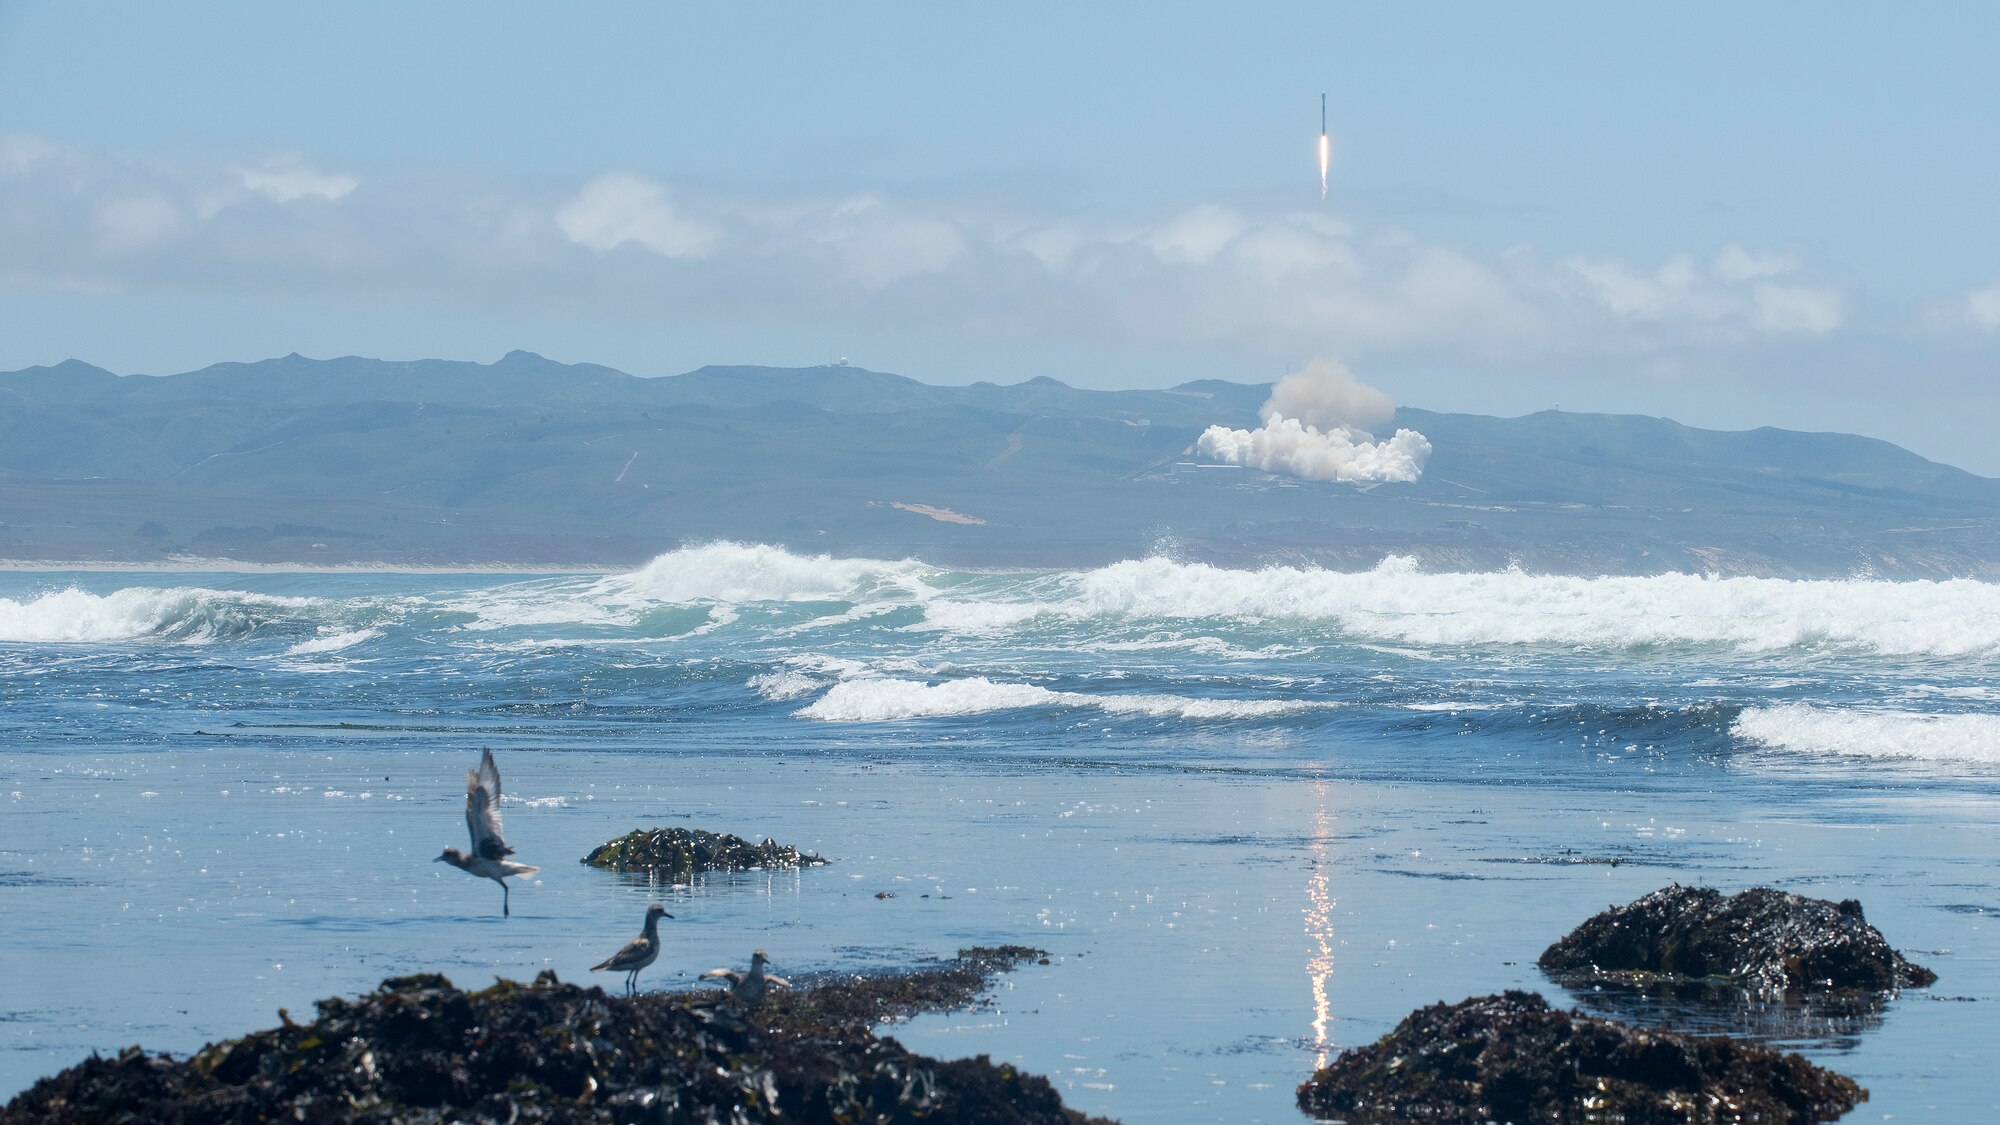 Team Vandenberg successfully launched a Falcon 9 rocket carrying both Iridium and Grace FO payloads from Space Launch Complex-4 here, Tuesday, May 22, at 12:47 p.m. PDT.